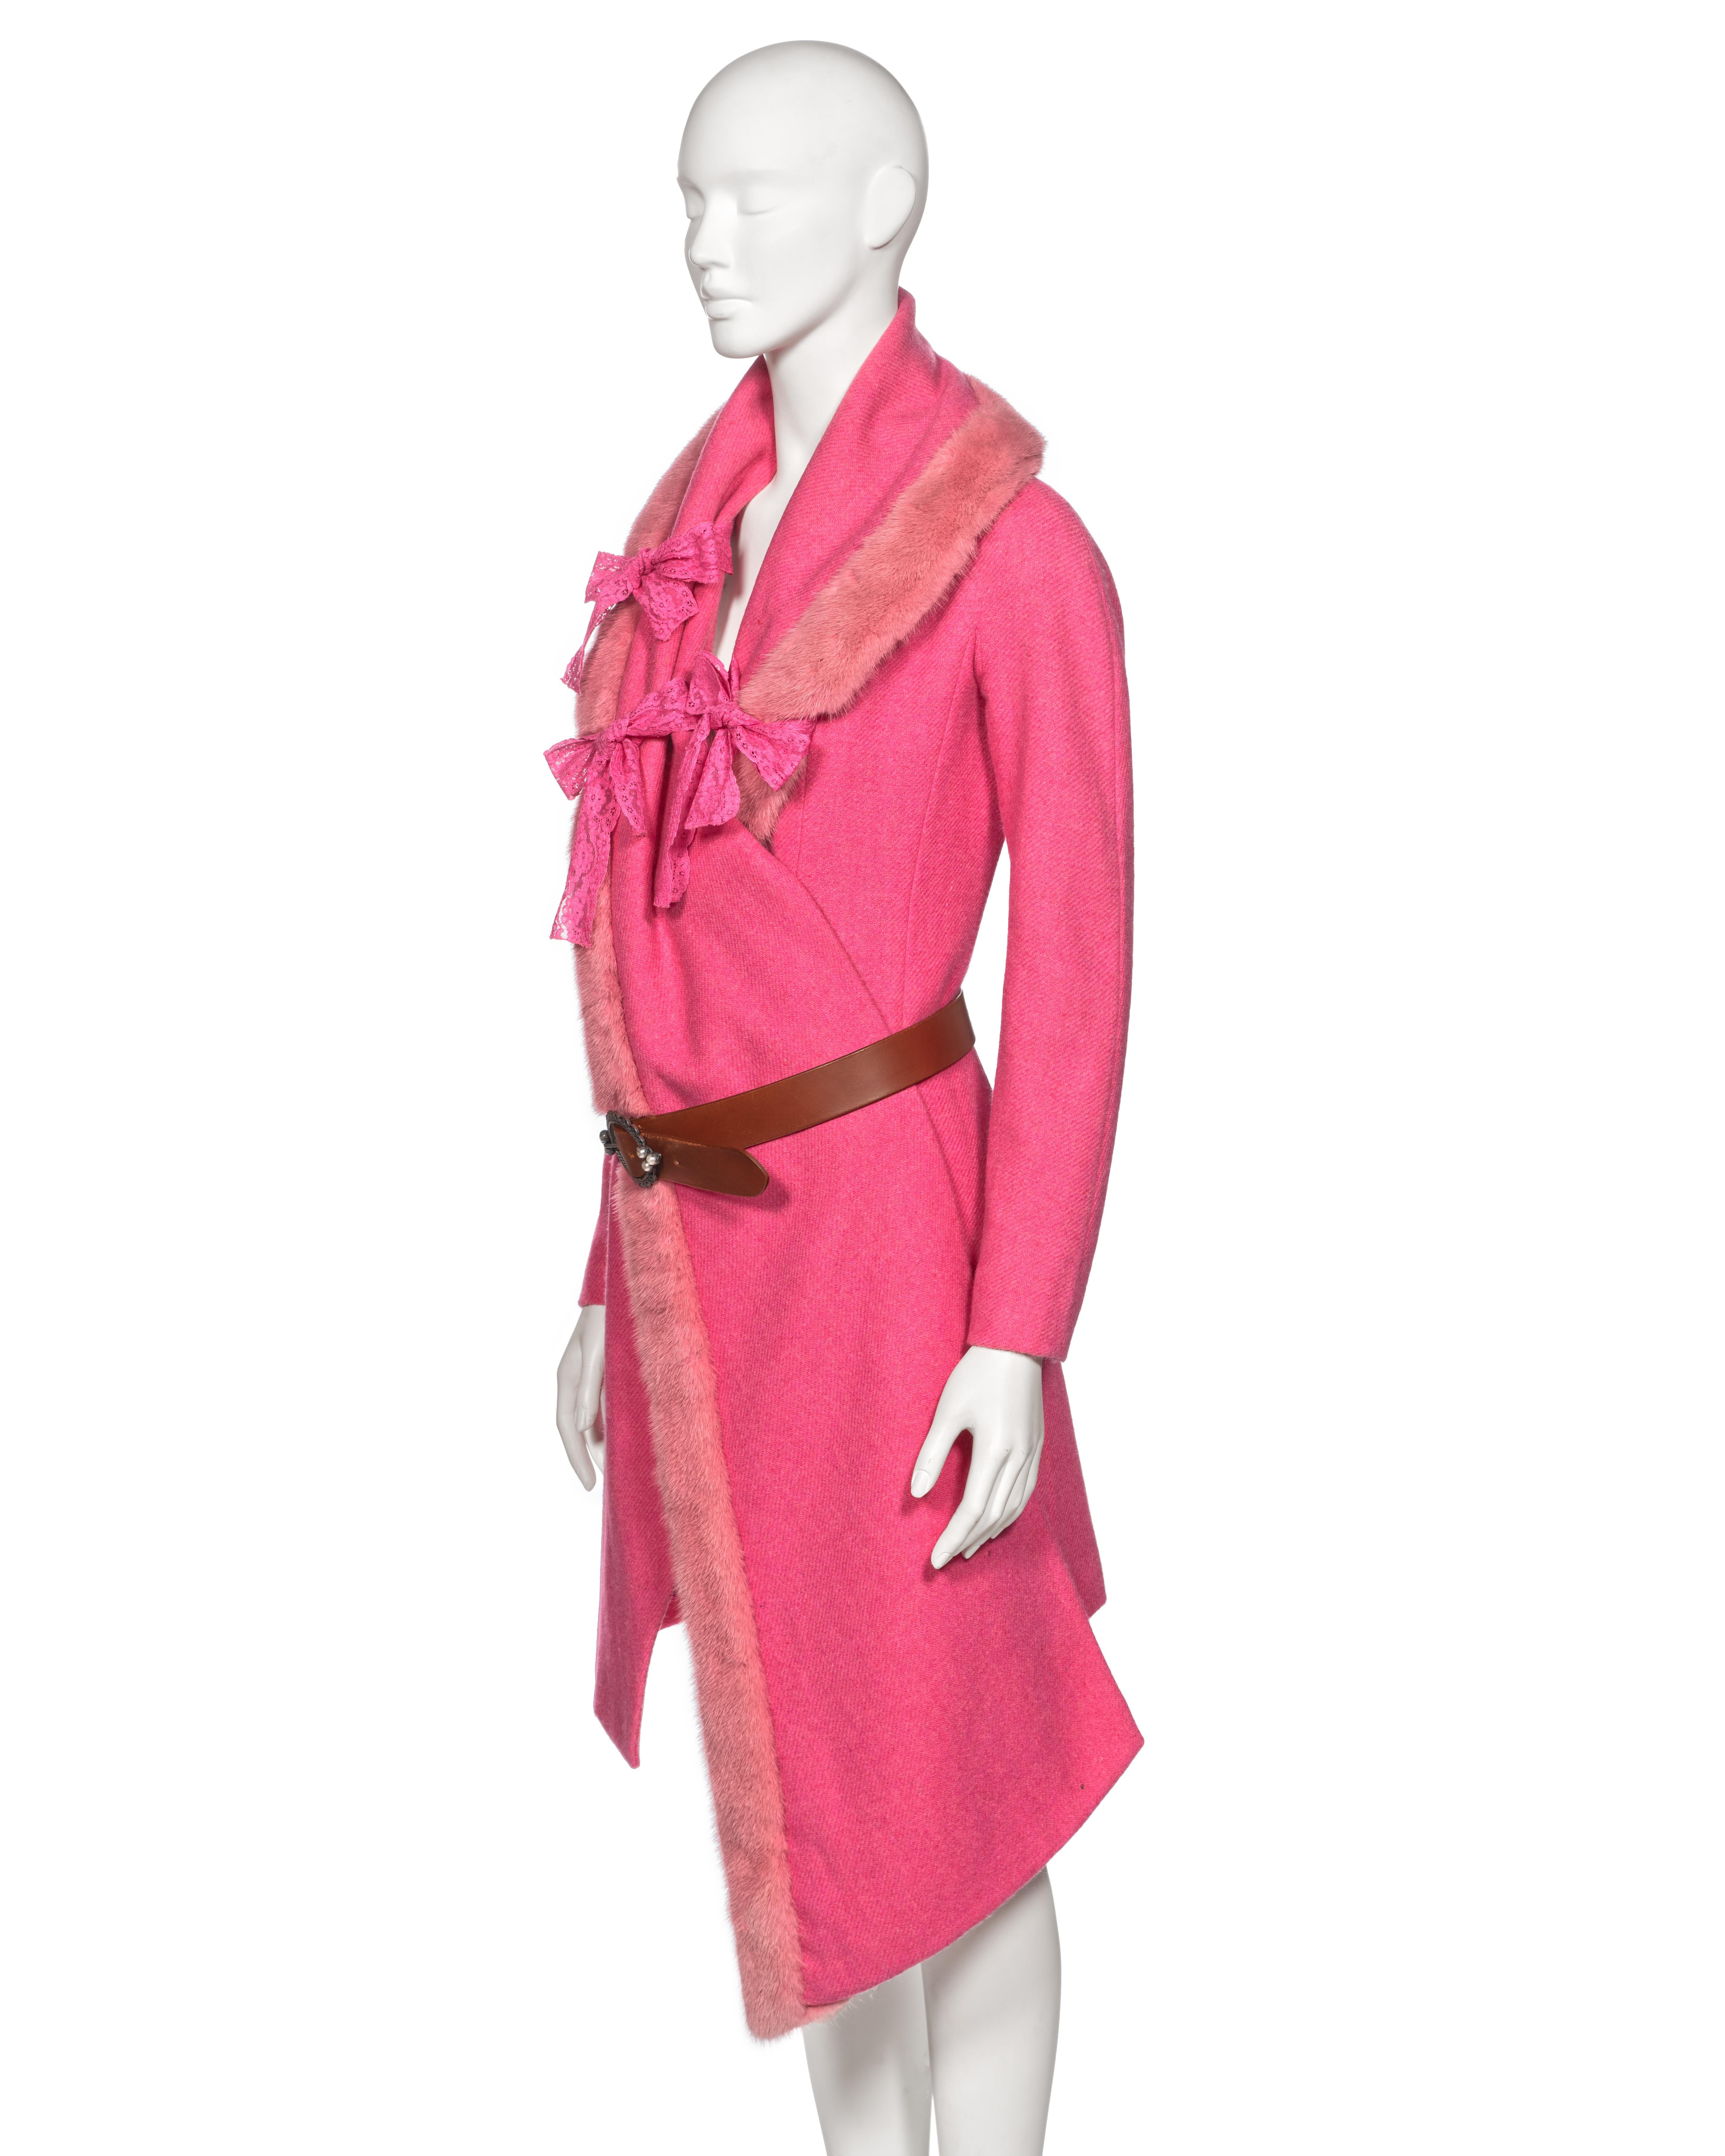 Christian Dior by John Galliano Pink Tweed Coat With Mink Fur Collar, fw 1998 For Sale 6